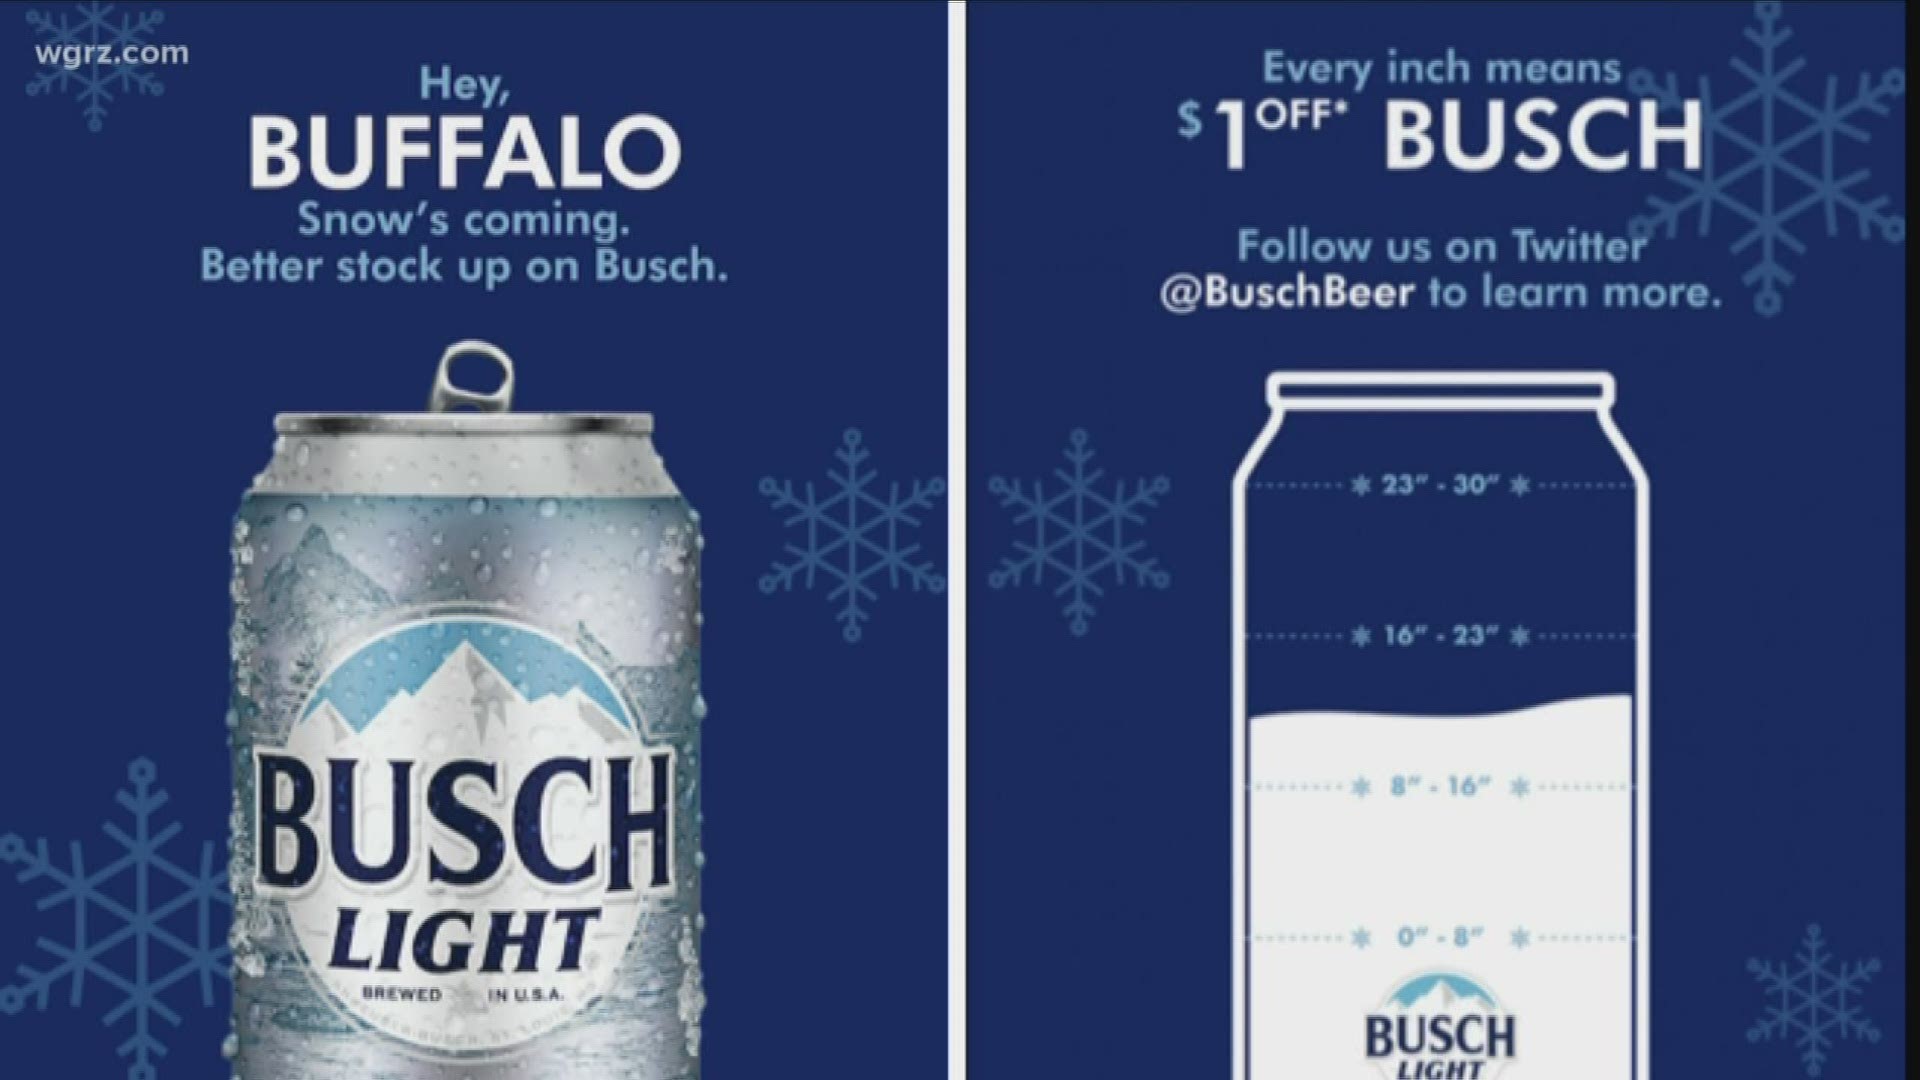 busch-beer-offers-1-rebate-for-every-inch-of-snow-in-minneapolis